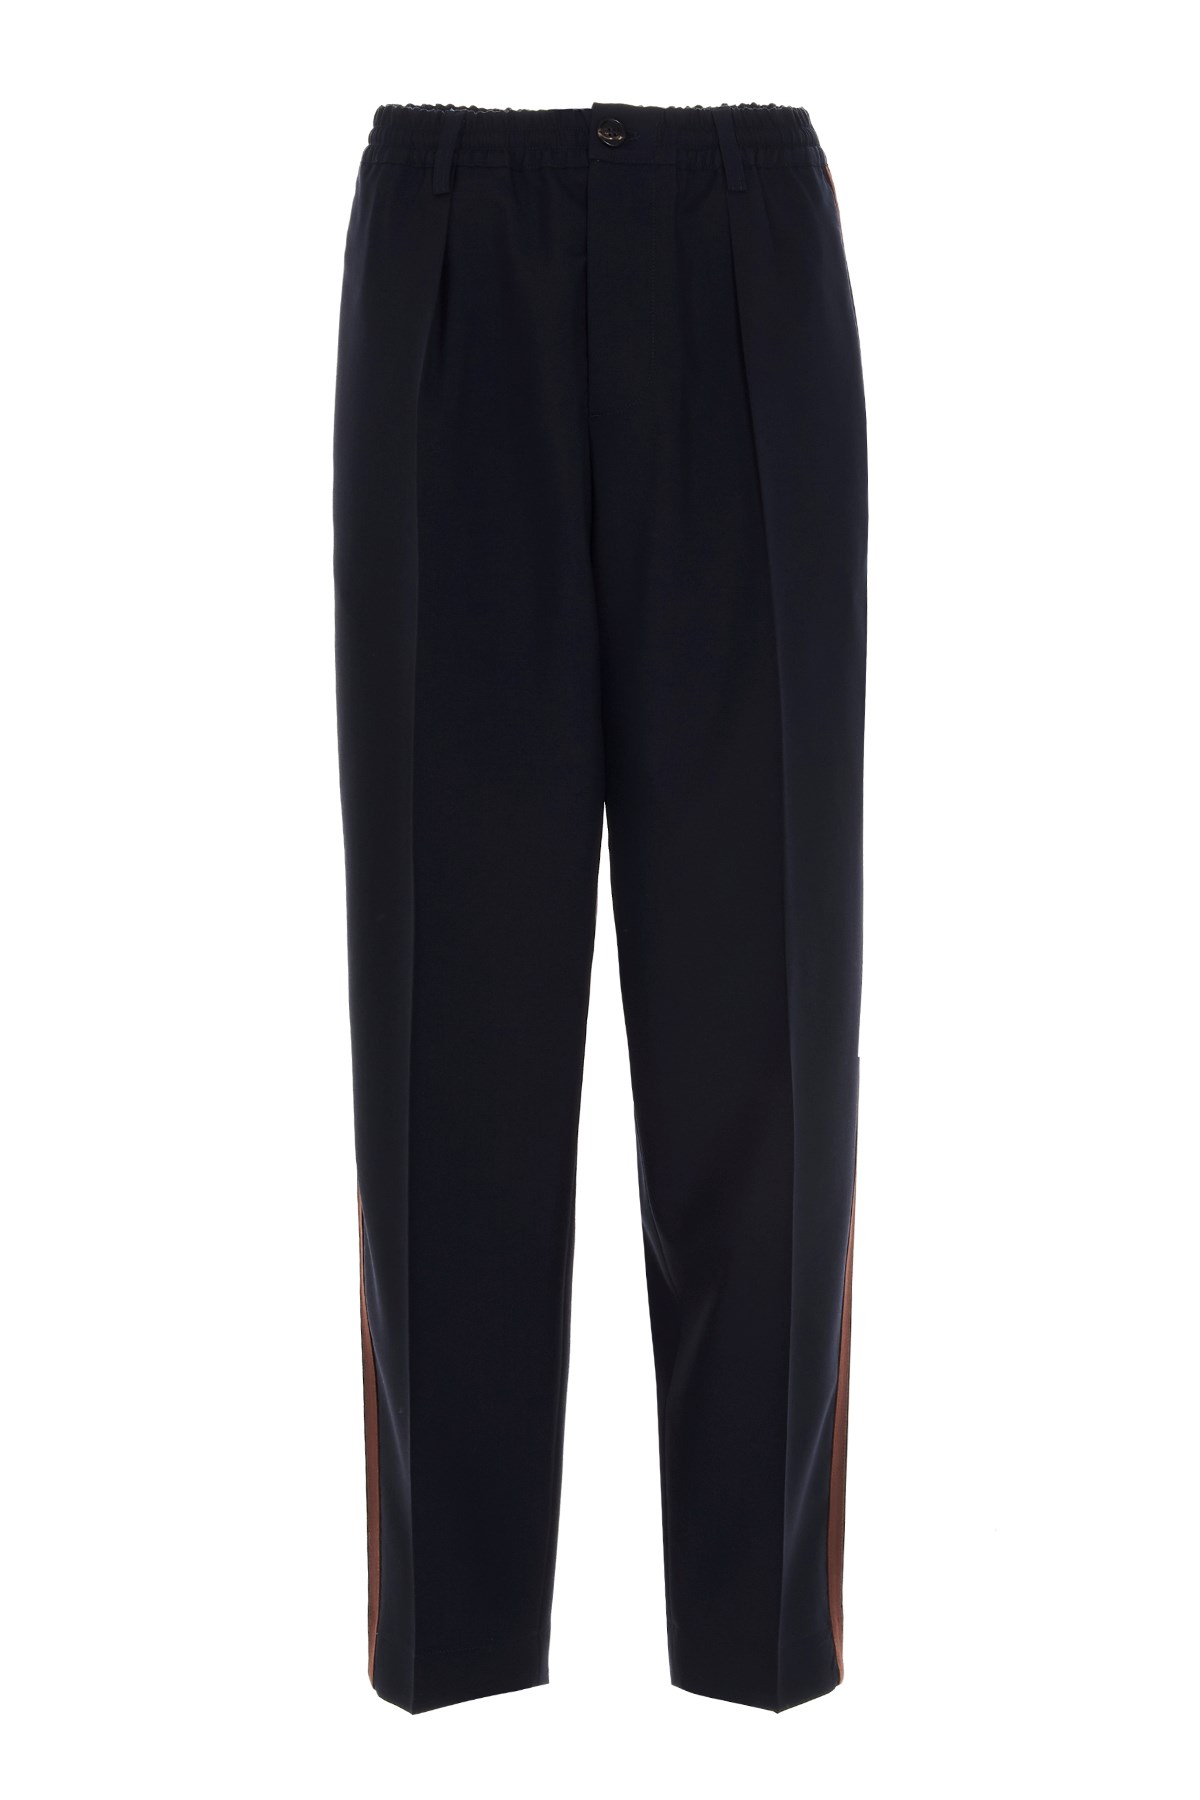 MARNI Virgin Wool Trousers With Side Band